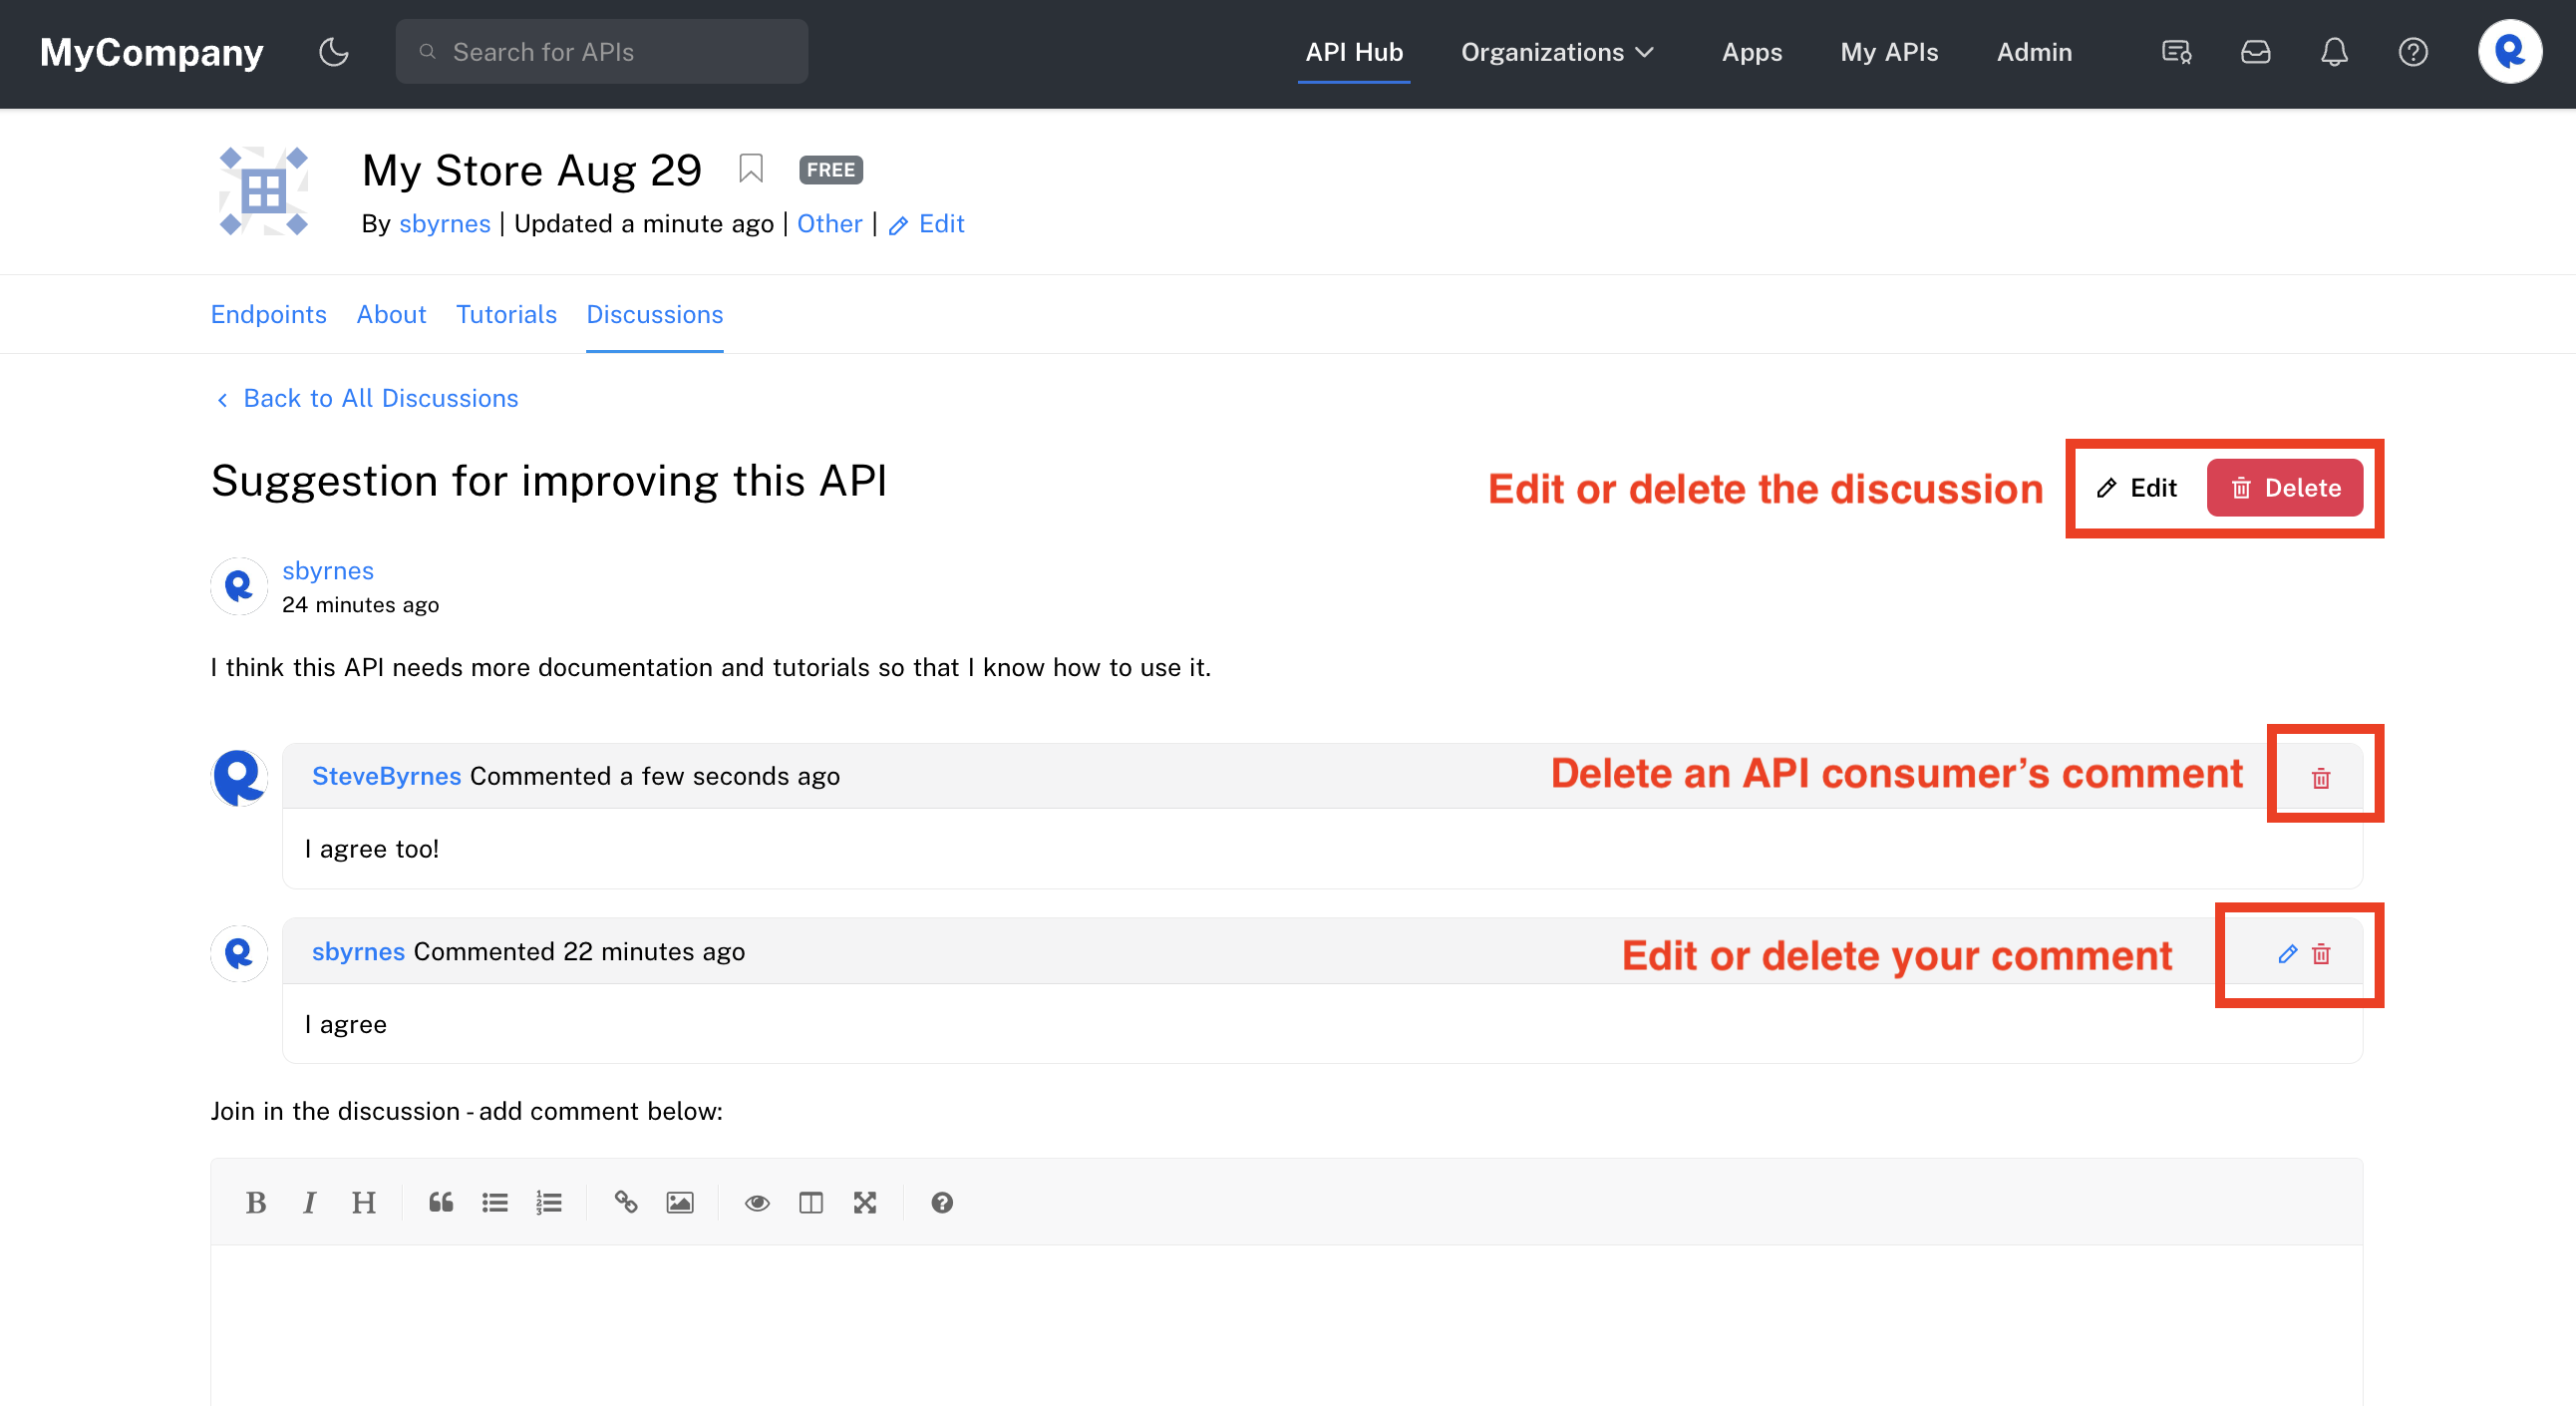 An API provider's view of an API's Discussions tab, where discussions and comments can be edited or deleted.